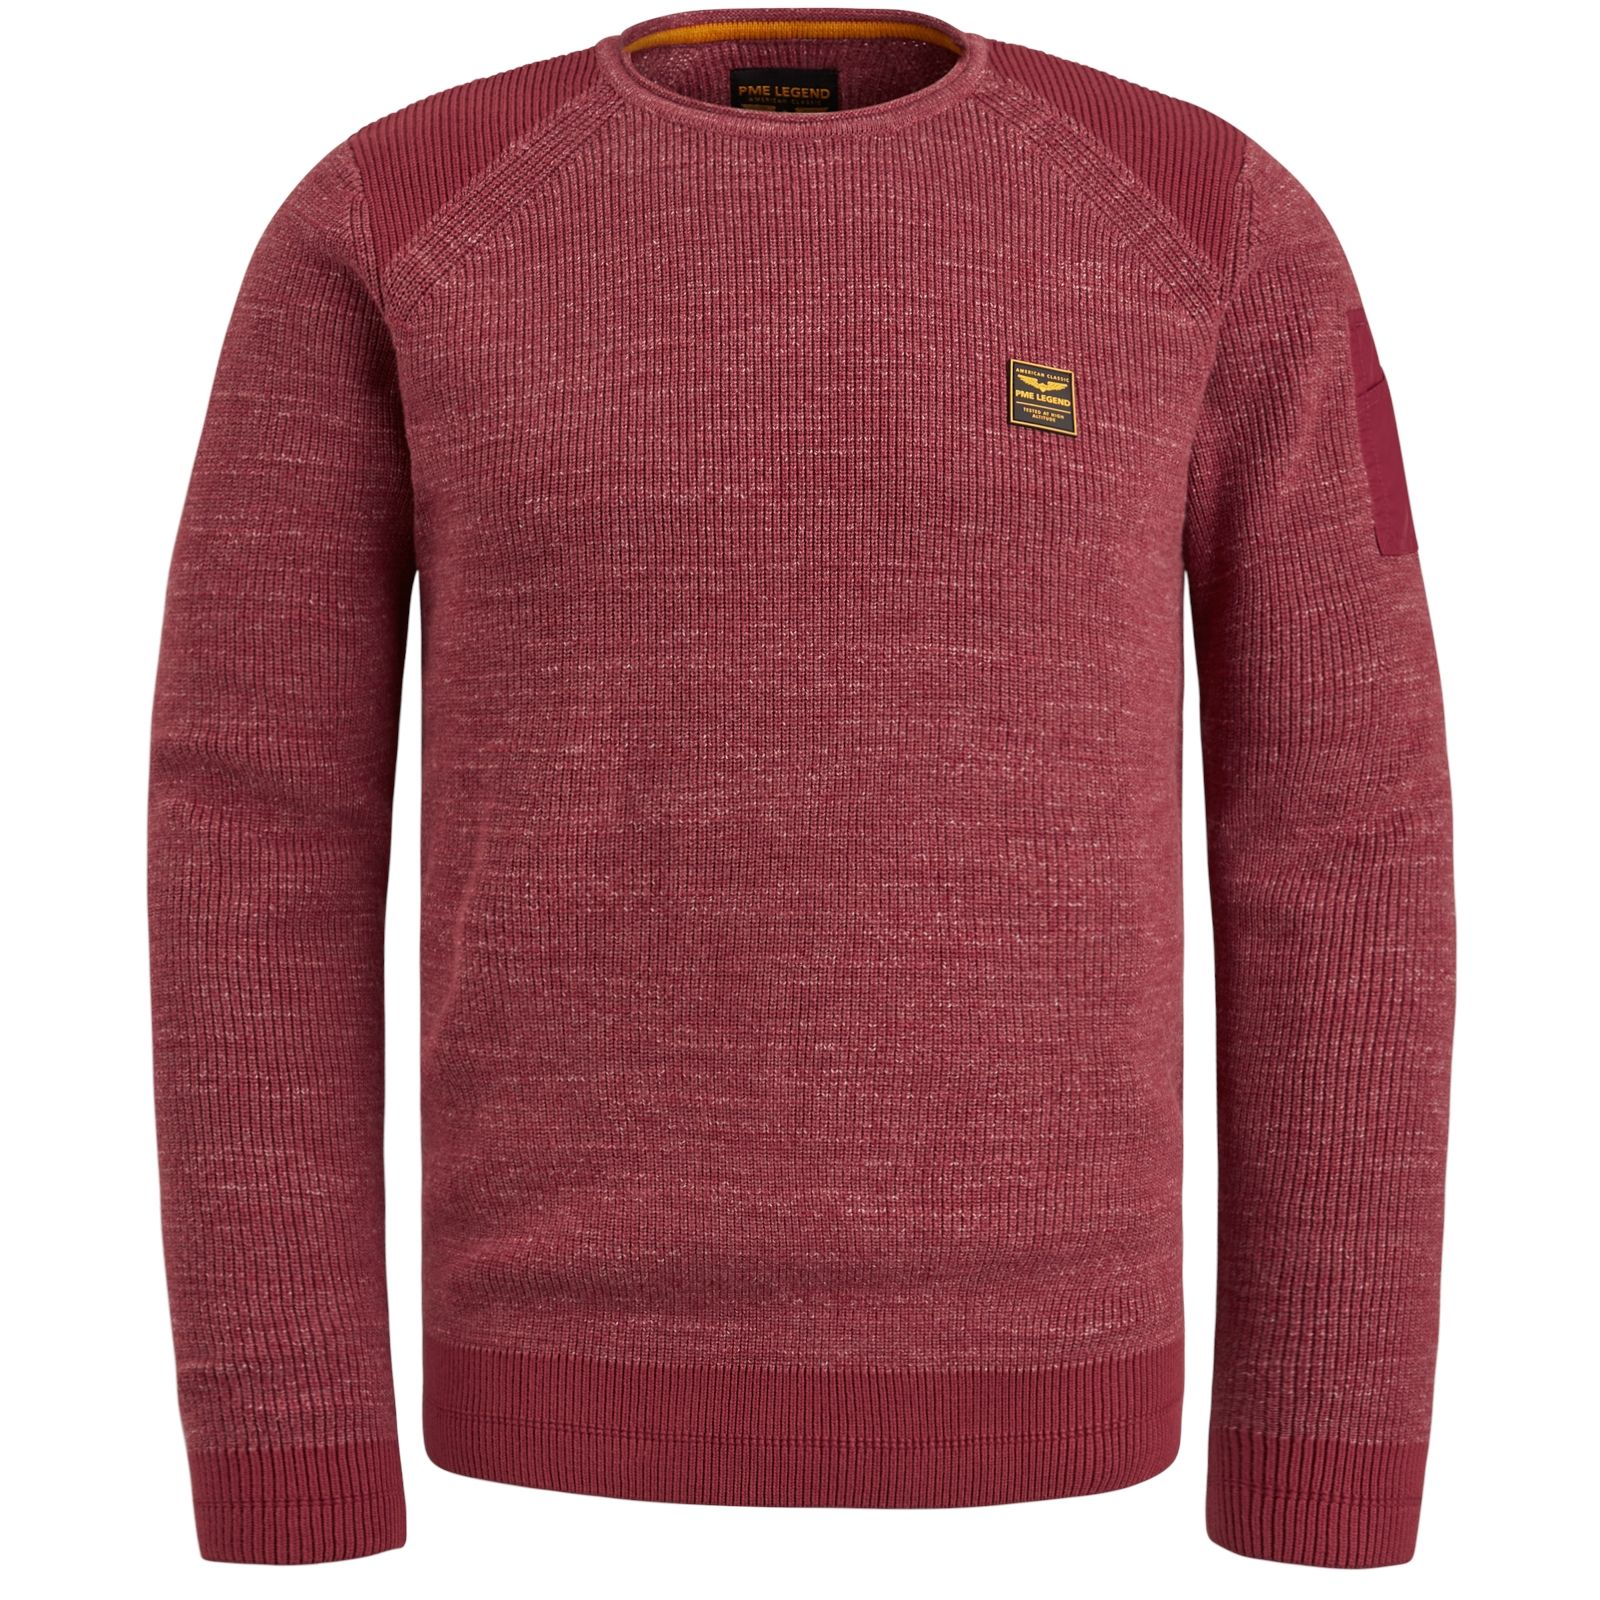 Pme Legend R-neck cotton rib melee knit Rosewood 00105127-3182